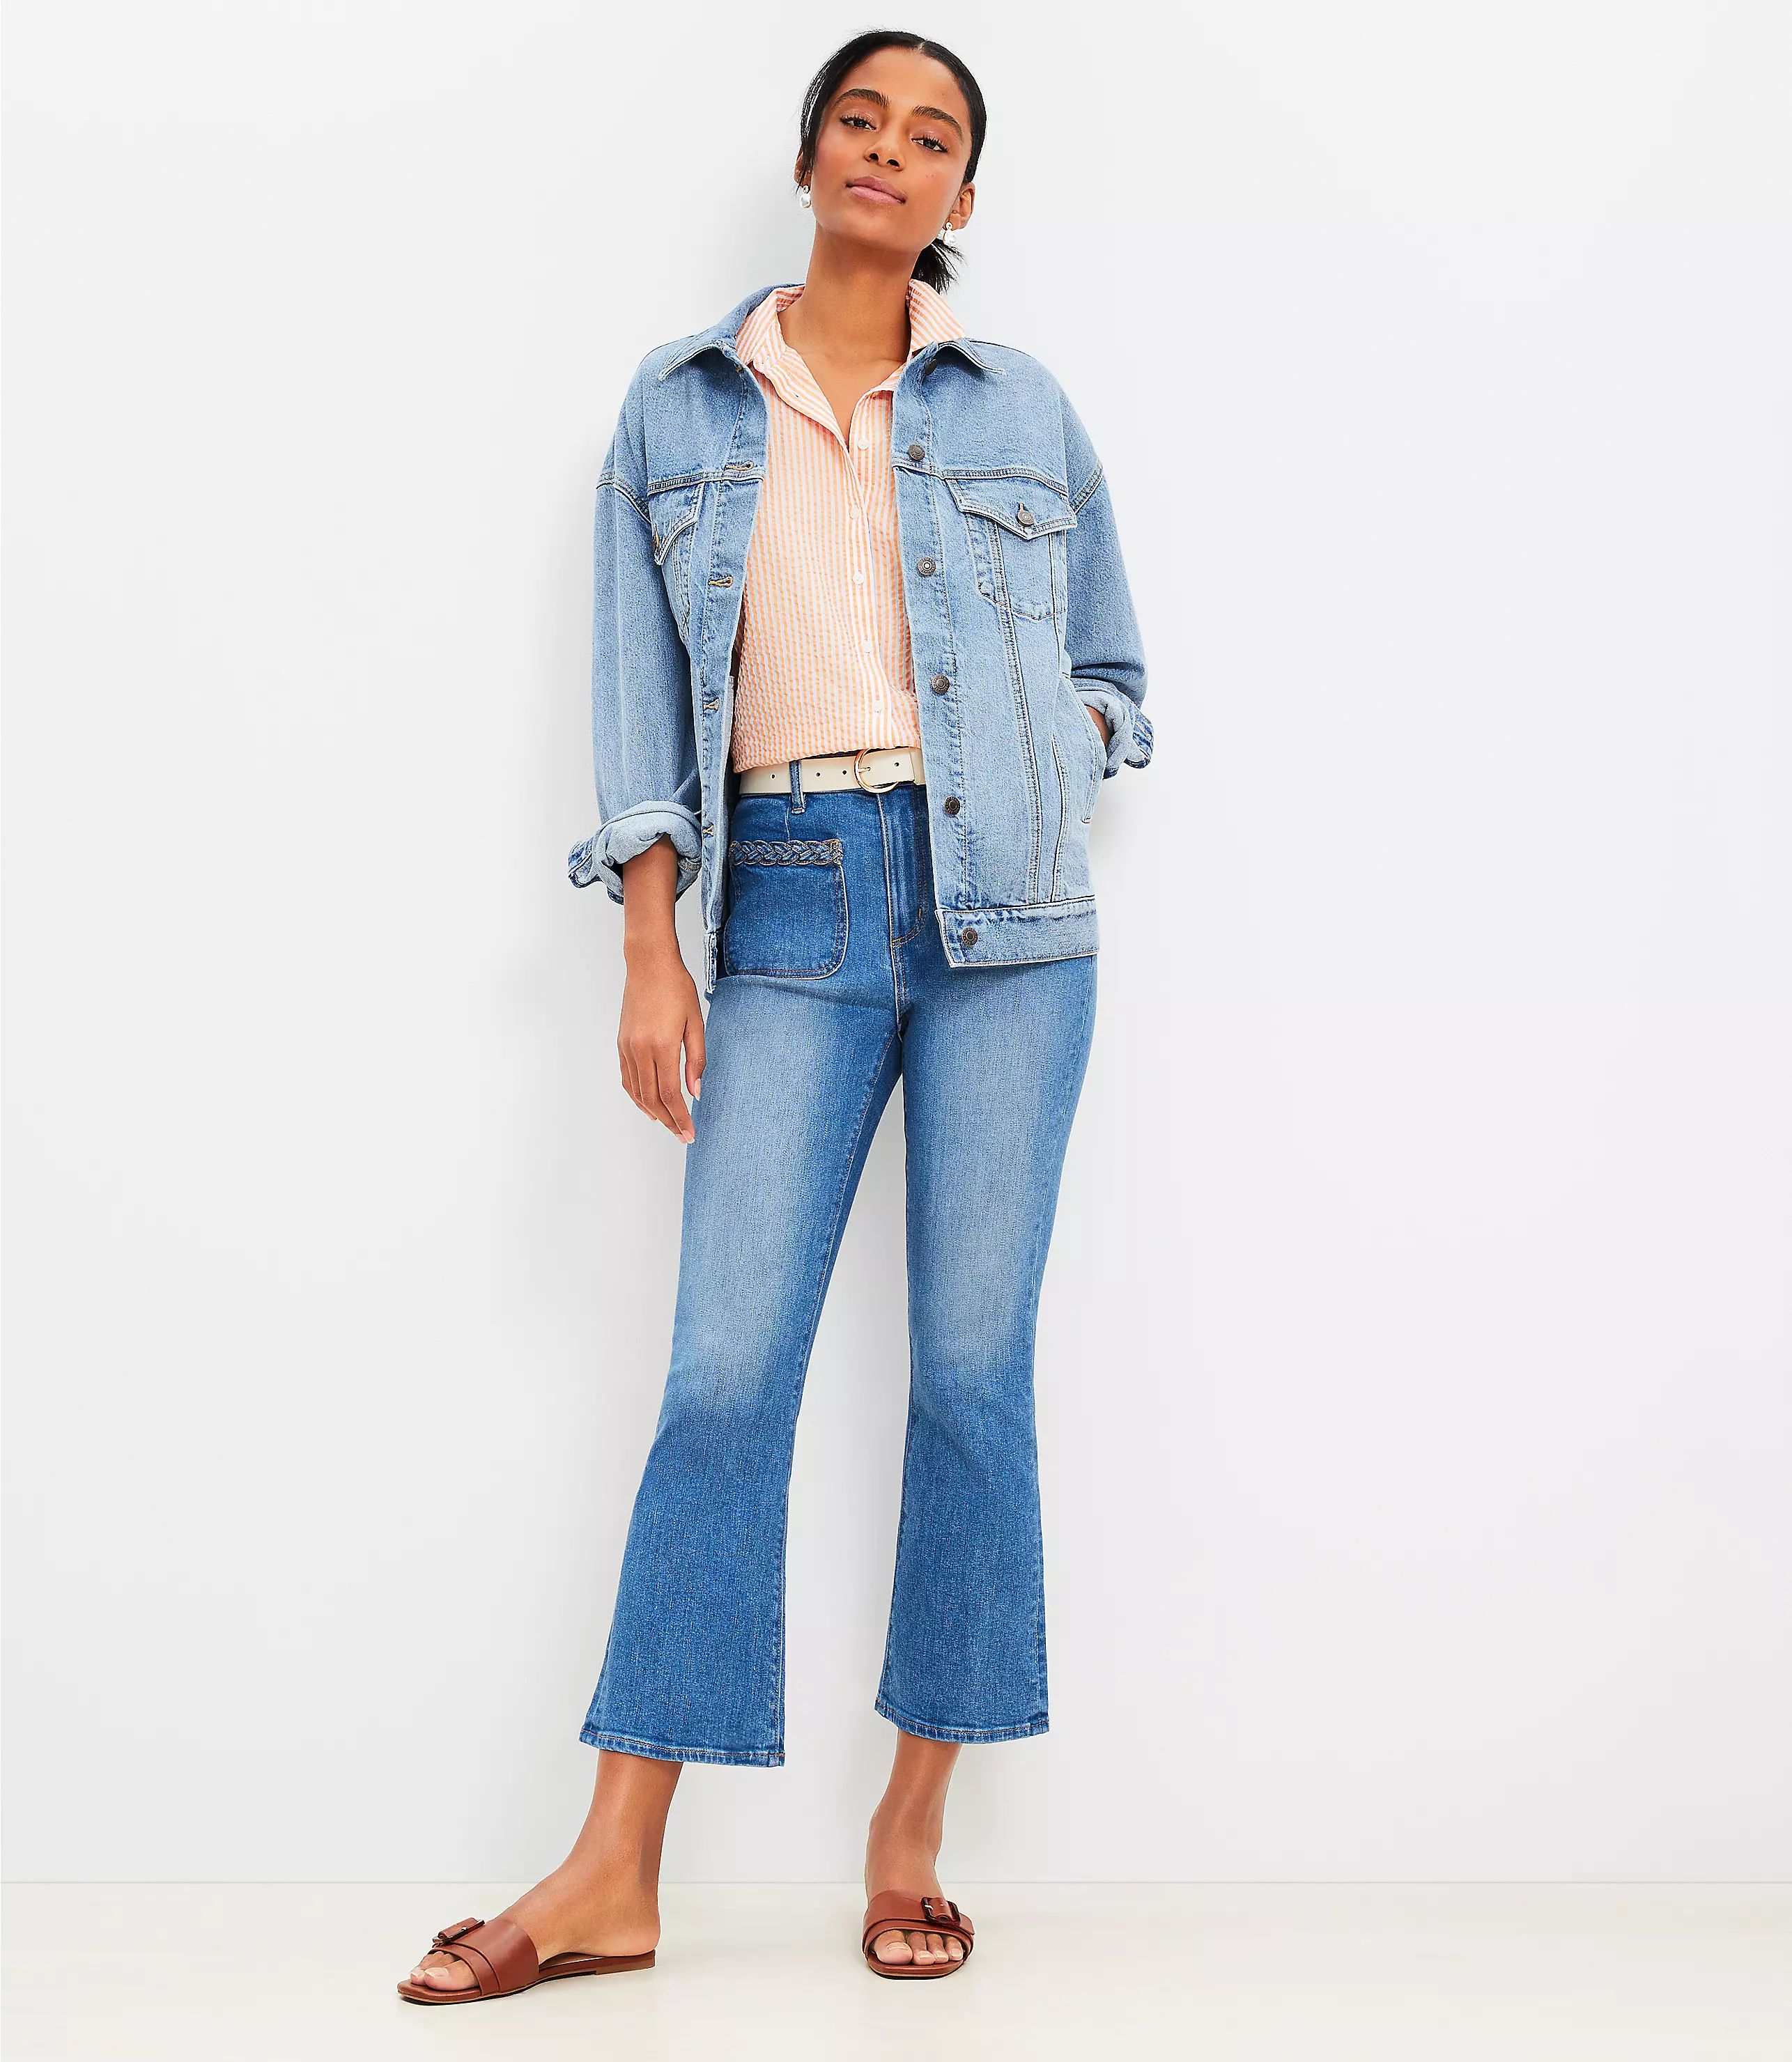 Braided High Rise Kick Crop Jeans in Classic Mid Wash | LOFT